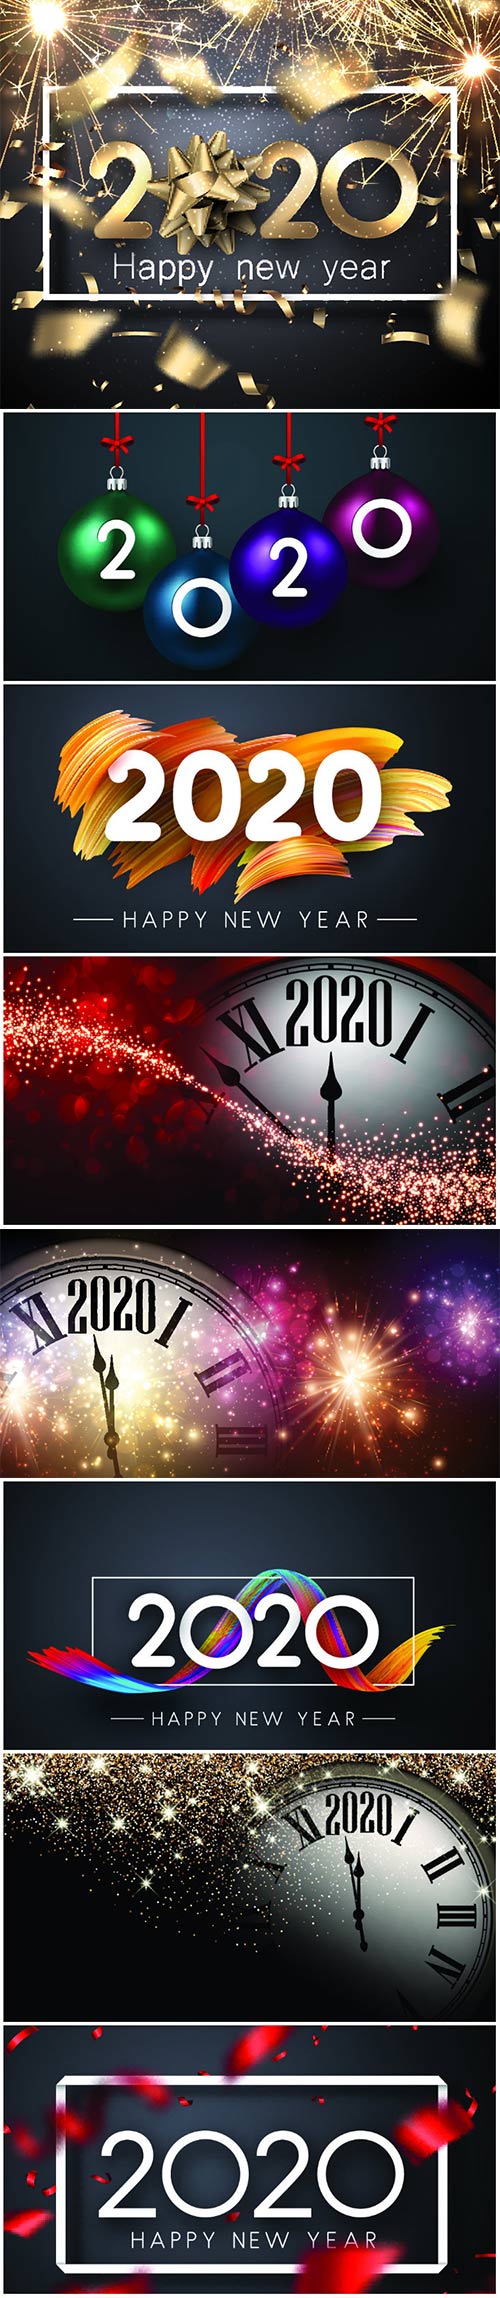 Happy New Year 2020 card with sparklers, bow and blurred golden confetti